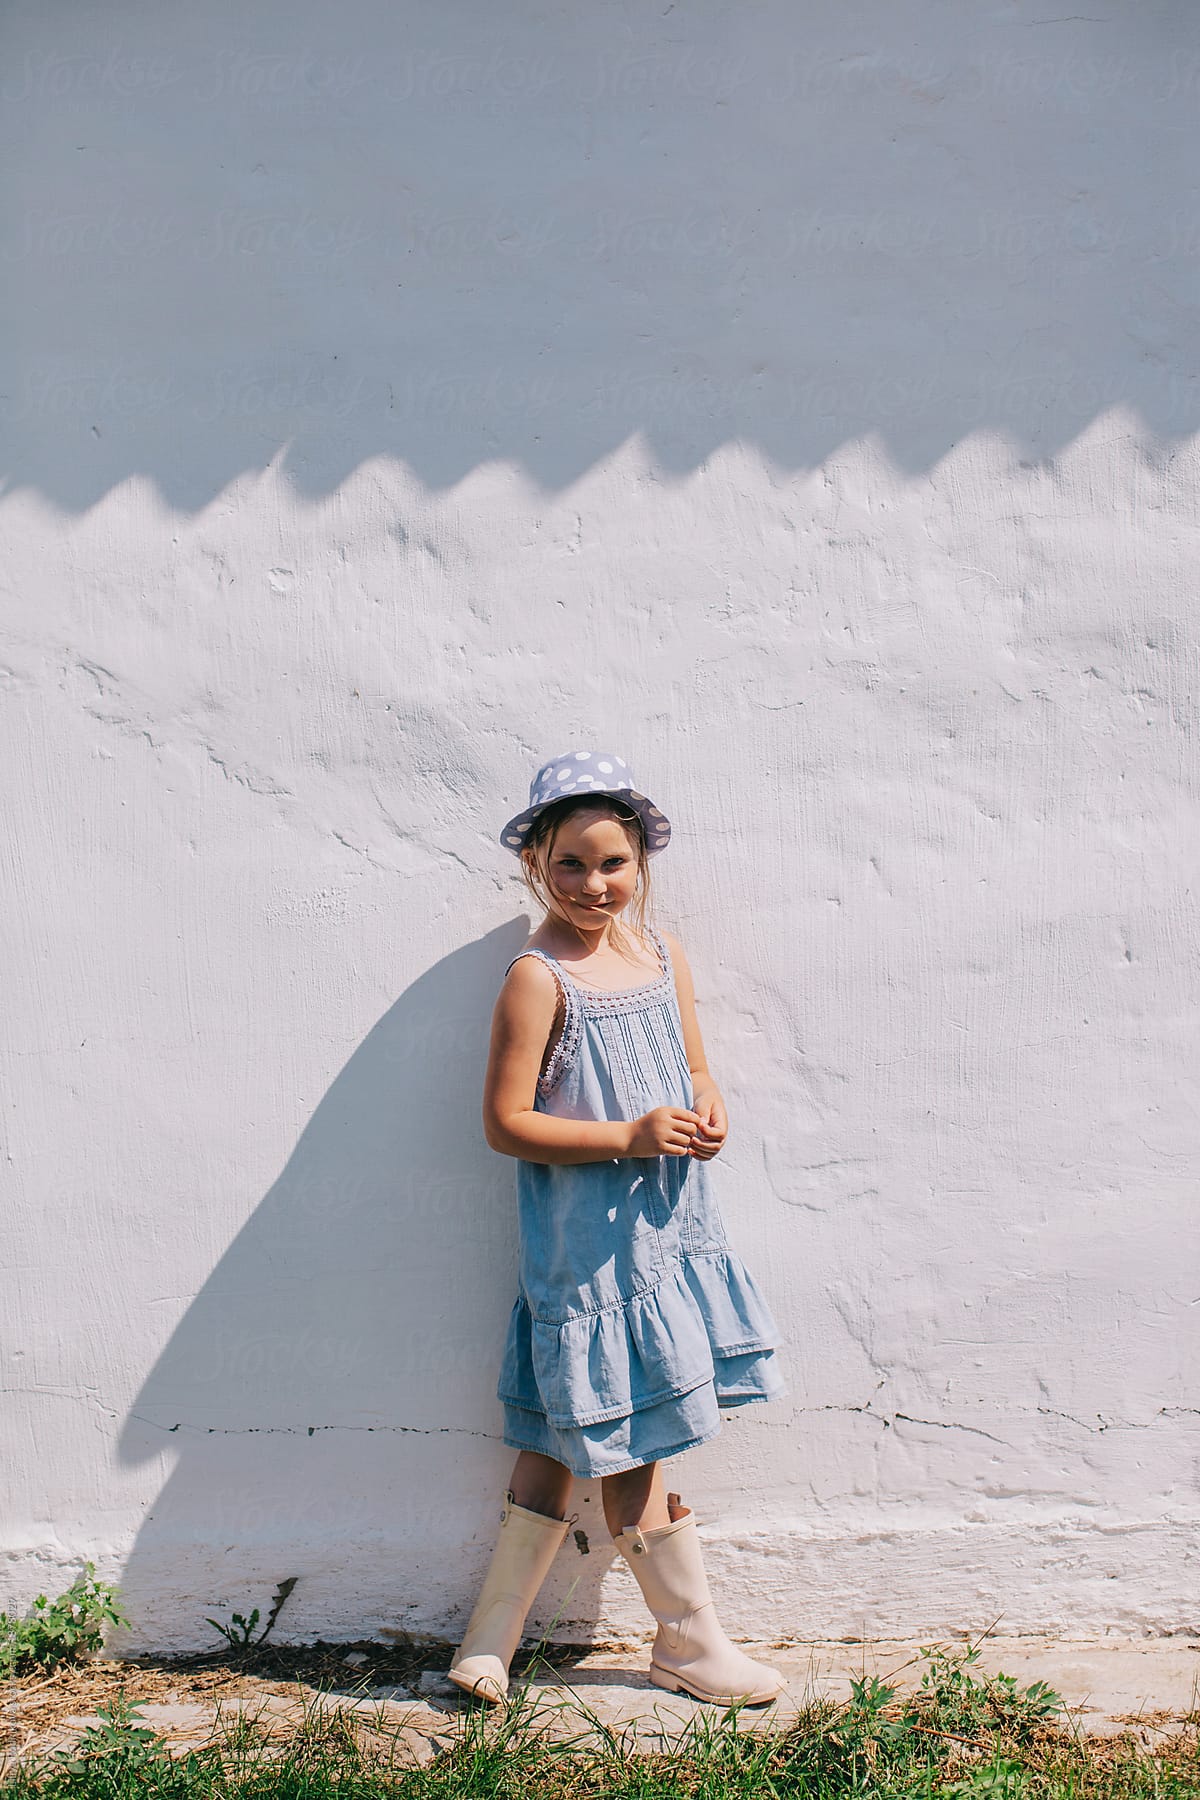 Stylish little girl posing by the white wall outdoors